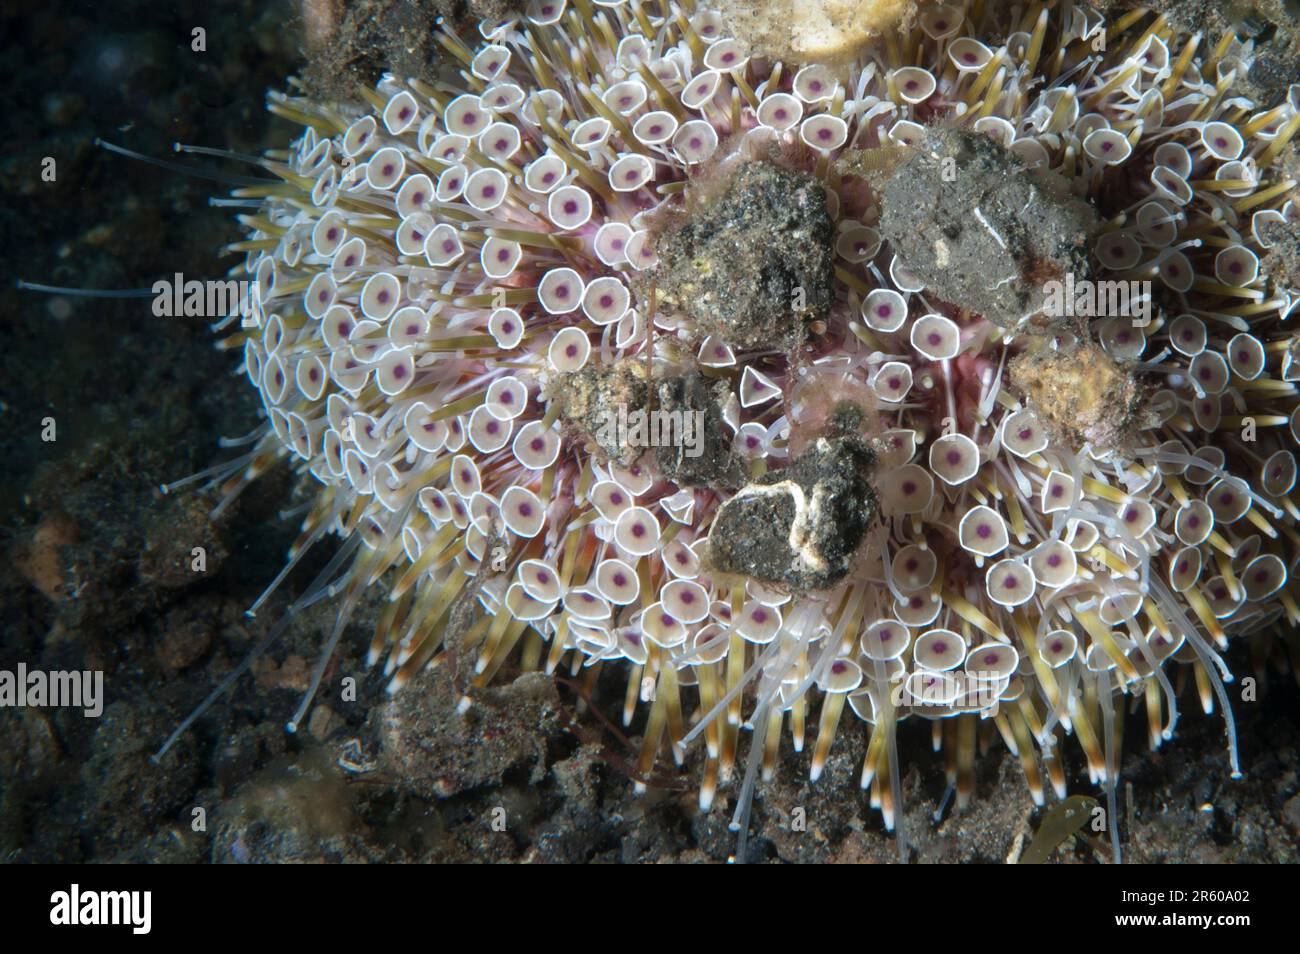 Flower Urchin, Toxopneustes pileolus, pedicellariae with debris attached for protection and camouflage, Jahir dive site, Lembeh Straits, Sulawesi, Ind Stock Photo